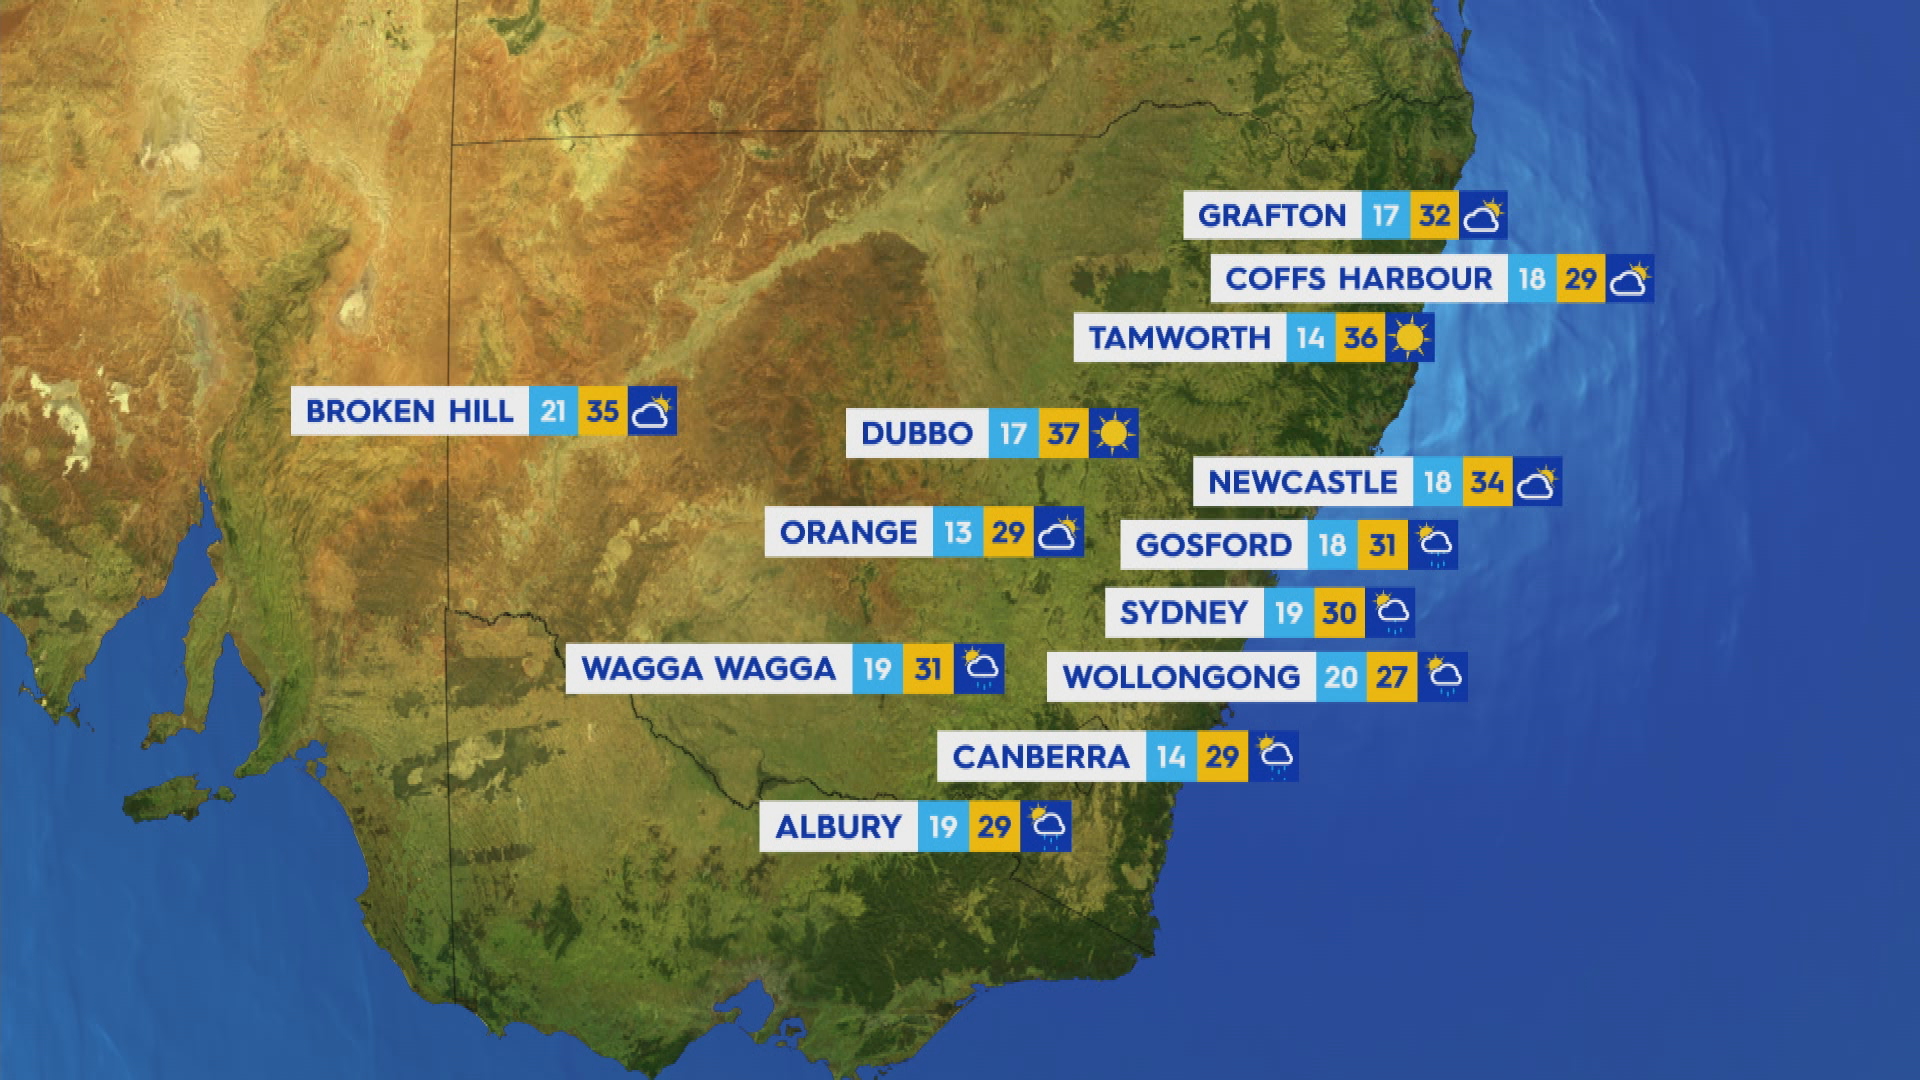 National weather forecast for Thursday, March 14